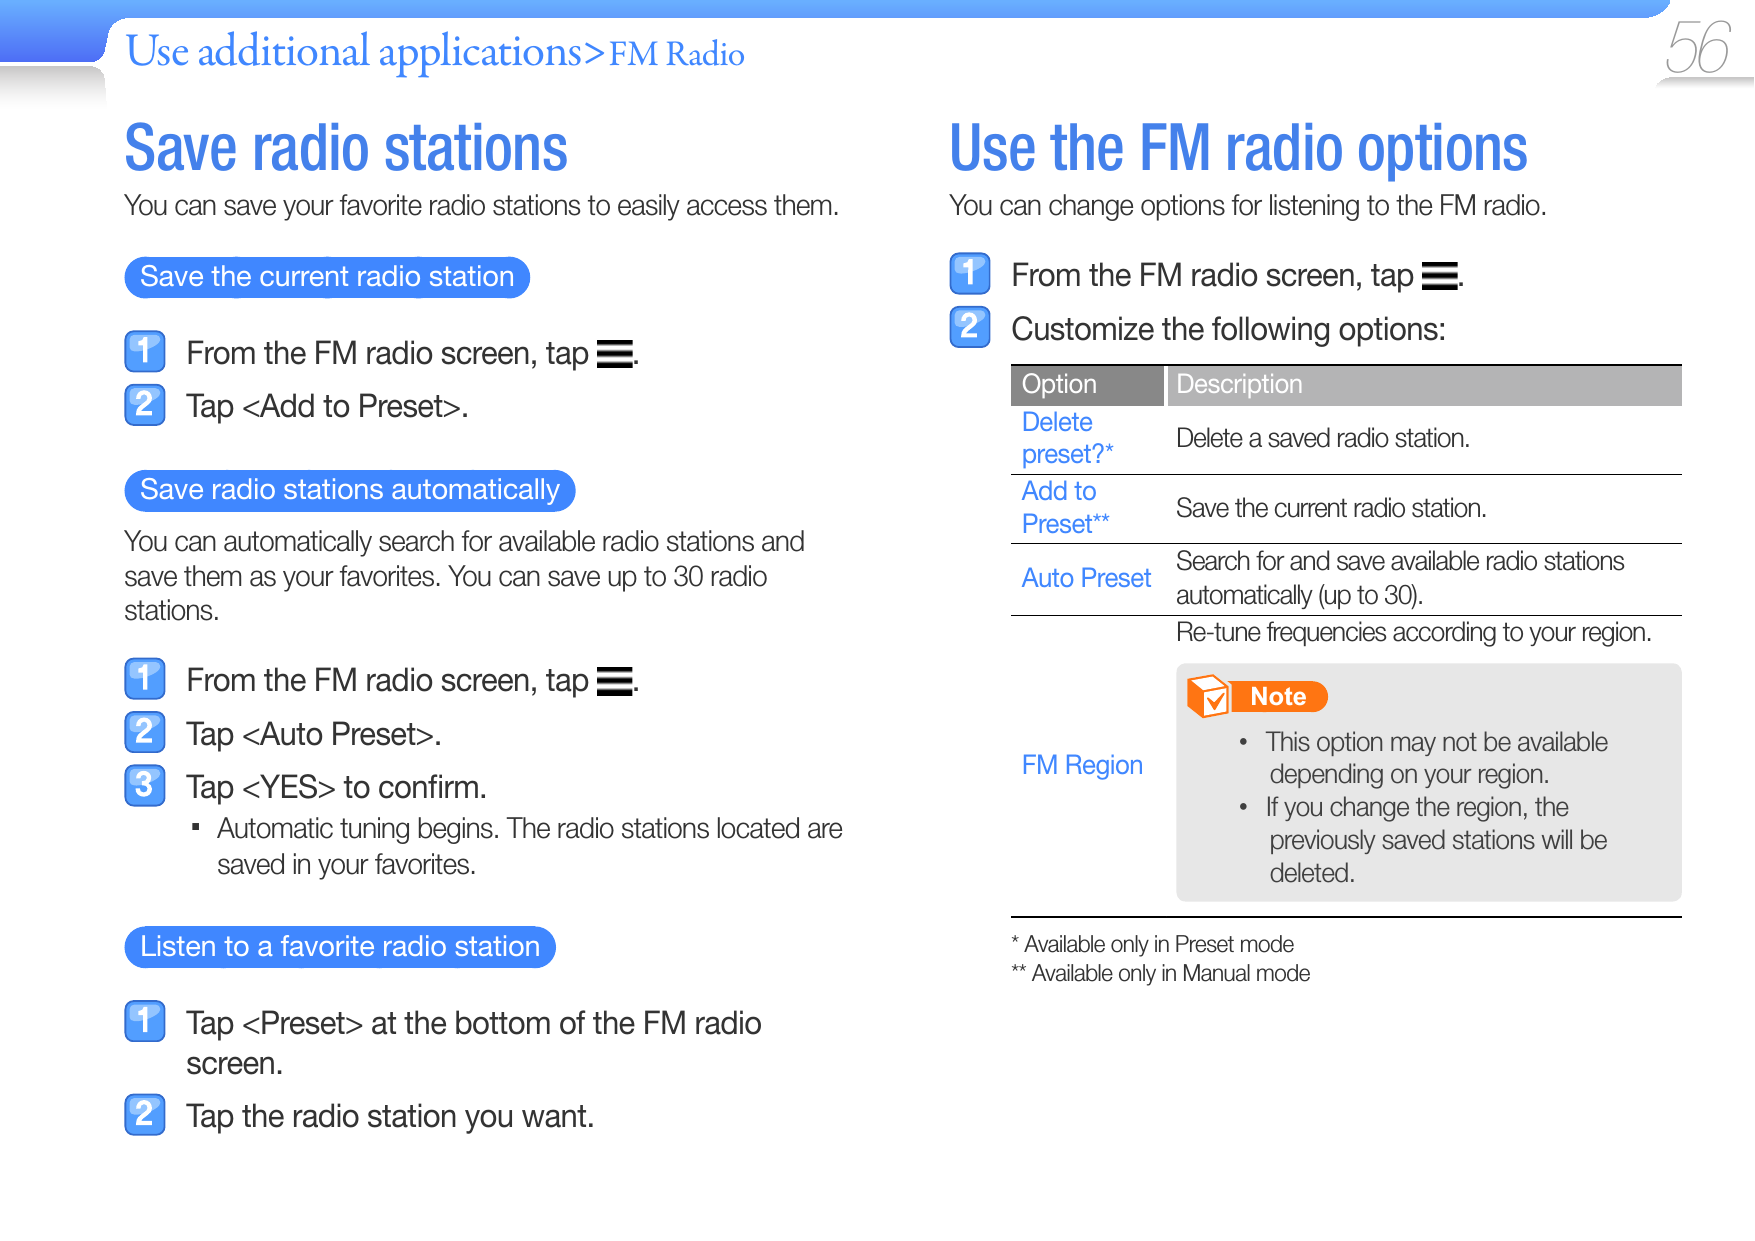 Use additional applications&gt;FM Radio 56 Save   radio  stationsYou can save your favorite radio stations to easily access them.   Save the current radio station    From the FM radio screen, tap  .  Tap &lt;Add to Preset&gt;.   Save radio stations automatically  You can automatically search for available radio stations and save them as your favorites. You can save up to 30 radio stations.  From the FM radio screen, tap  .  Tap &lt;Auto Preset&gt;.  Tap &lt;YES&gt; to conﬁ rm.Automatic tuning begins. The radio stations located are  saved in your favorites.   Listen to a favorite radio station    Tap &lt;Preset&gt; at the bottom of the FM radio screen.  Tap the radio station you want. Use the FM radio optionsYou can change options for listening to the FM radio.  From the FM radio screen, tap  .  Customize the following options:Option DescriptionDelete preset?* Delete a saved radio station.Add to Preset** Save the current radio station.Auto Preset Search for and save available radio stations automatically (up to 30).FM RegionRe-tune frequencies according to your region.       Note   This option may not be available • depending on your region.If you change the region, the • previously saved stations will be deleted. * Available only in Preset mode** Available only in Manual mode